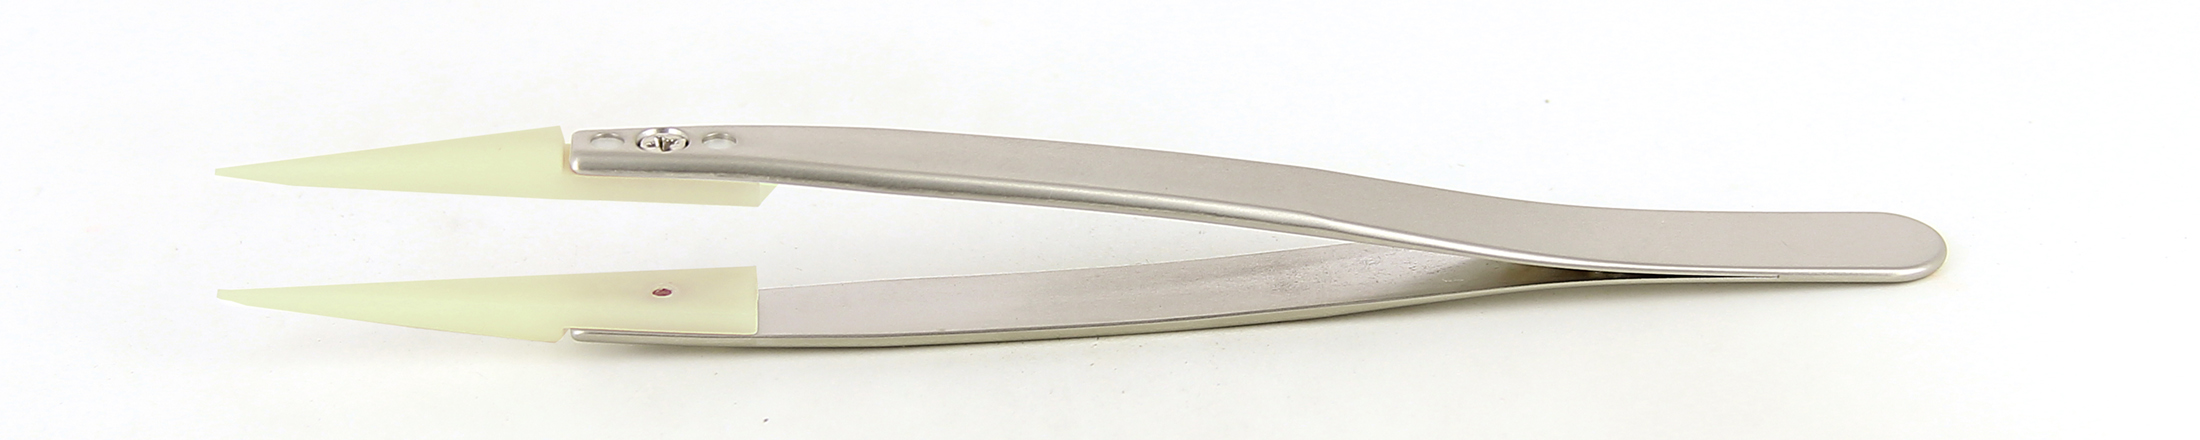 Plastic Precision Tweezers for Electronics Type 249CFR with Straight,  Thick, Beveled, Strong Tips